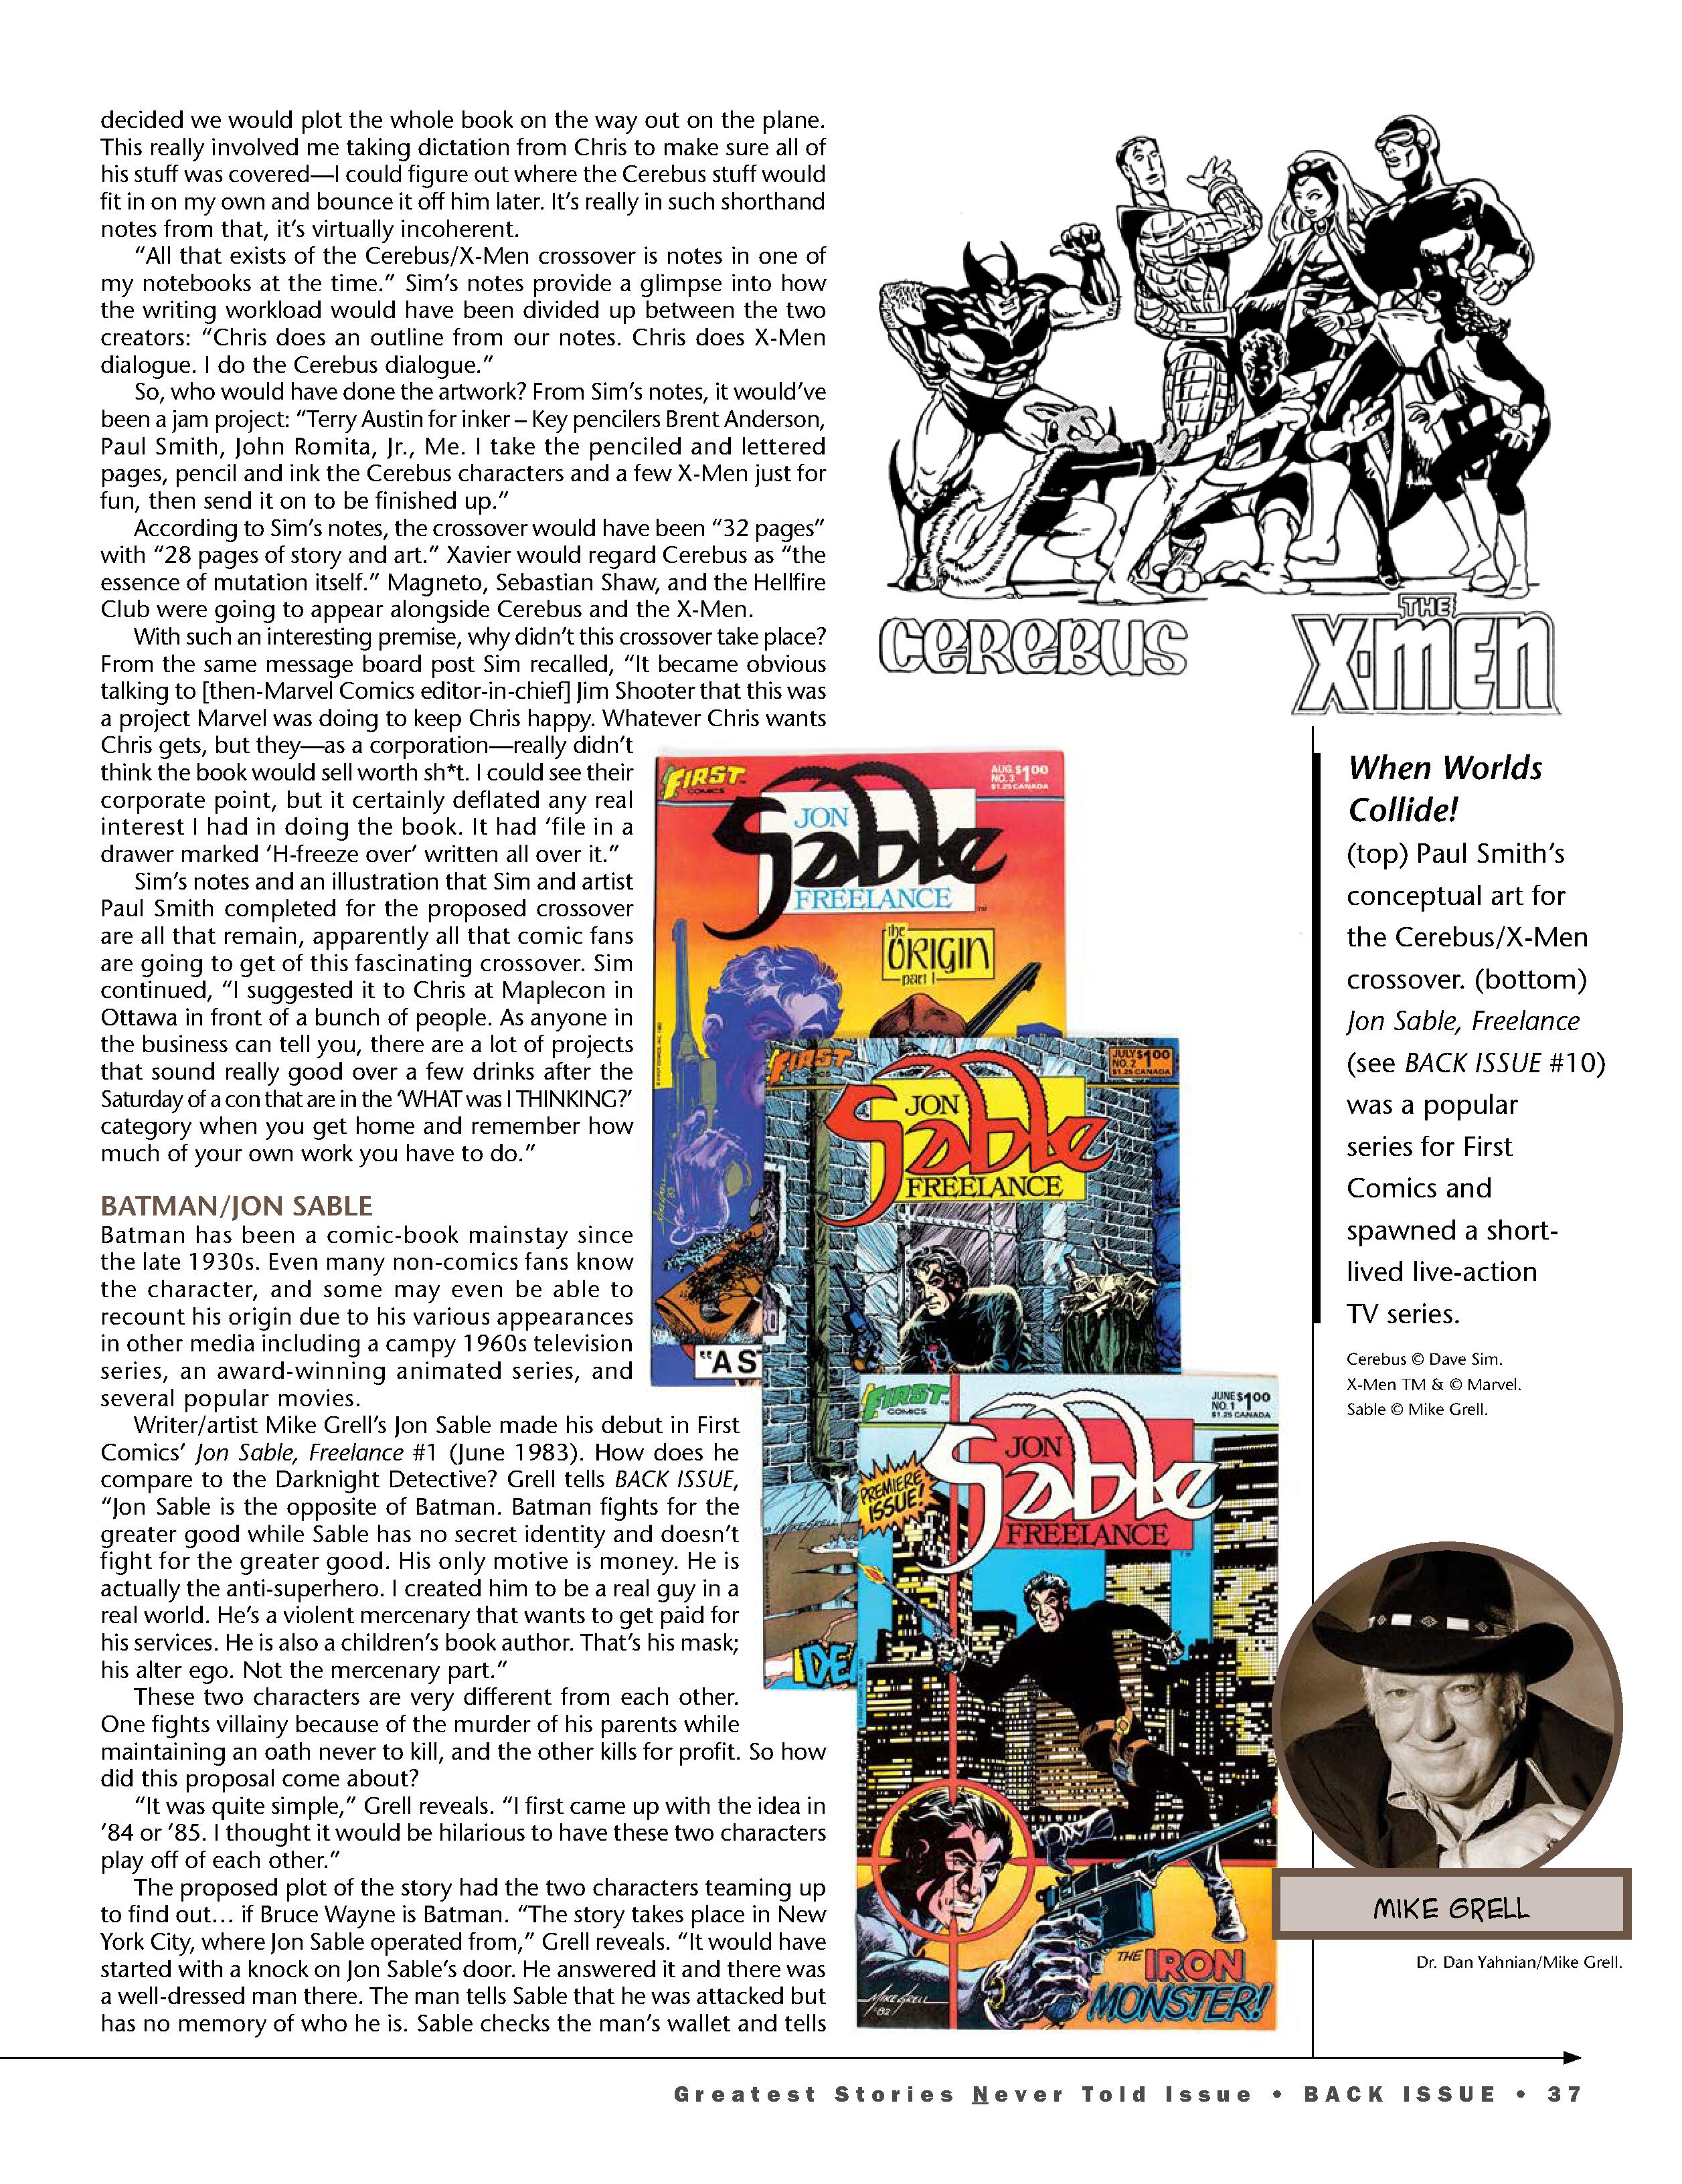 Read online Back Issue comic -  Issue #118 - 39